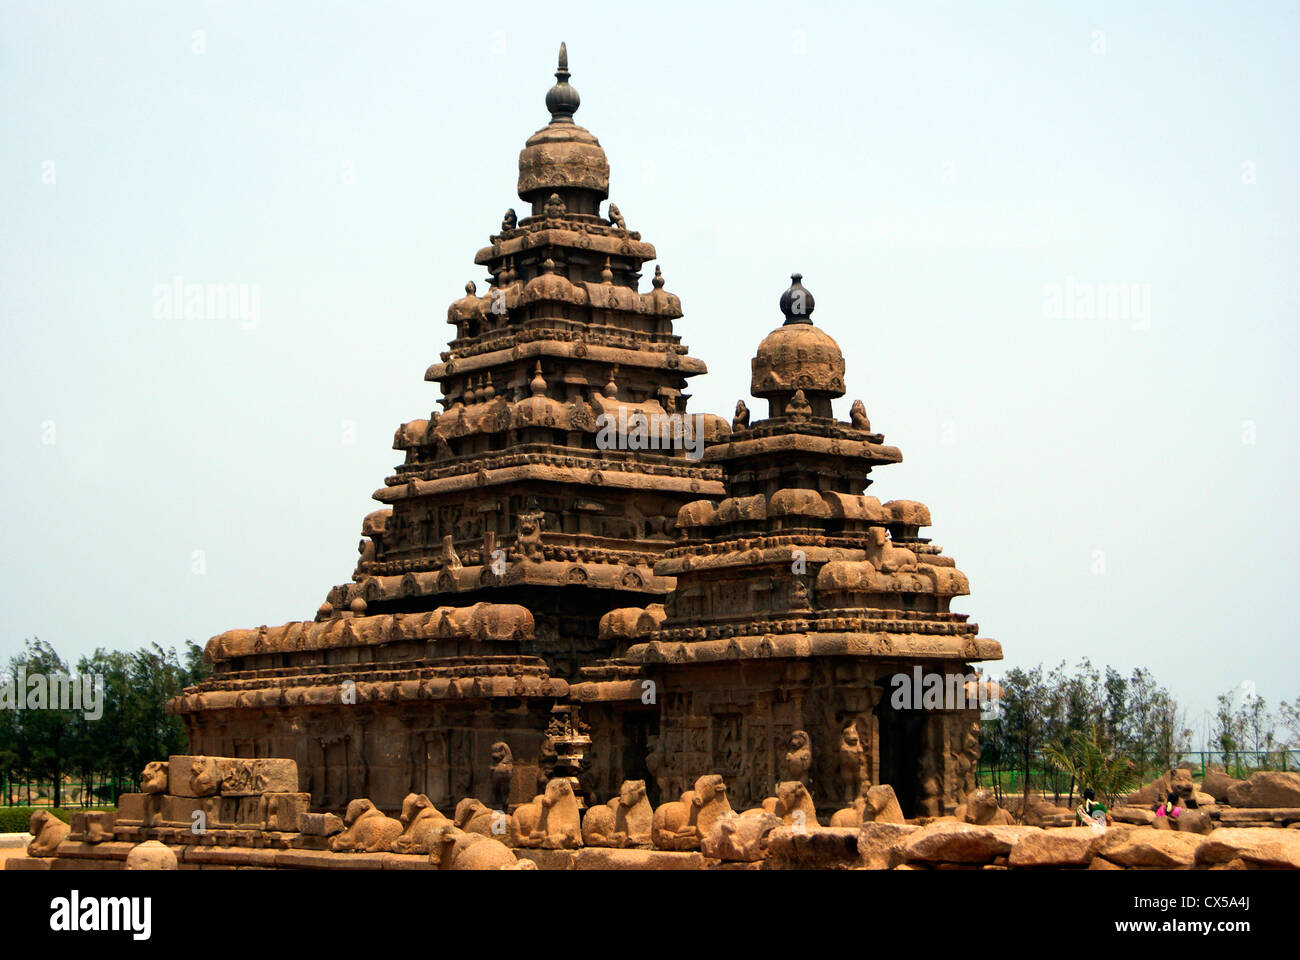 Shore Temple Mahabalipuram Architectural Wonder in Ancient Structural Temples stone Architecture and UNESCO heritage site India Stock Photo